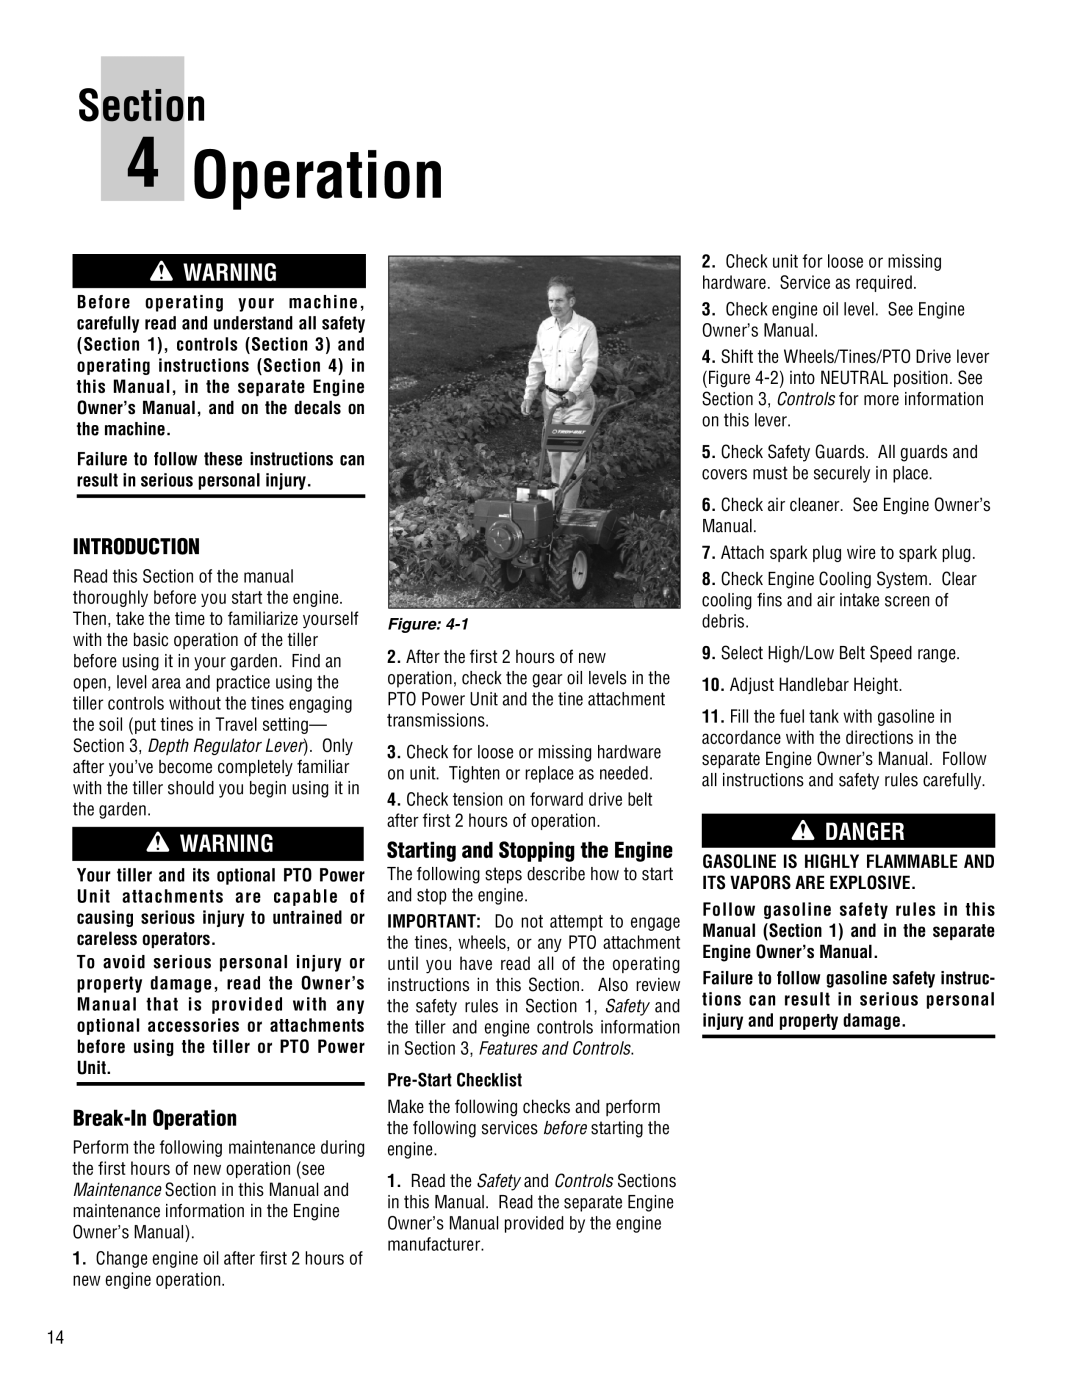 Troy-Bilt 682J-Horse Introduction, Break-In Operation, Starting and Stopping the Engine, Pre-Start Checklist, Section 